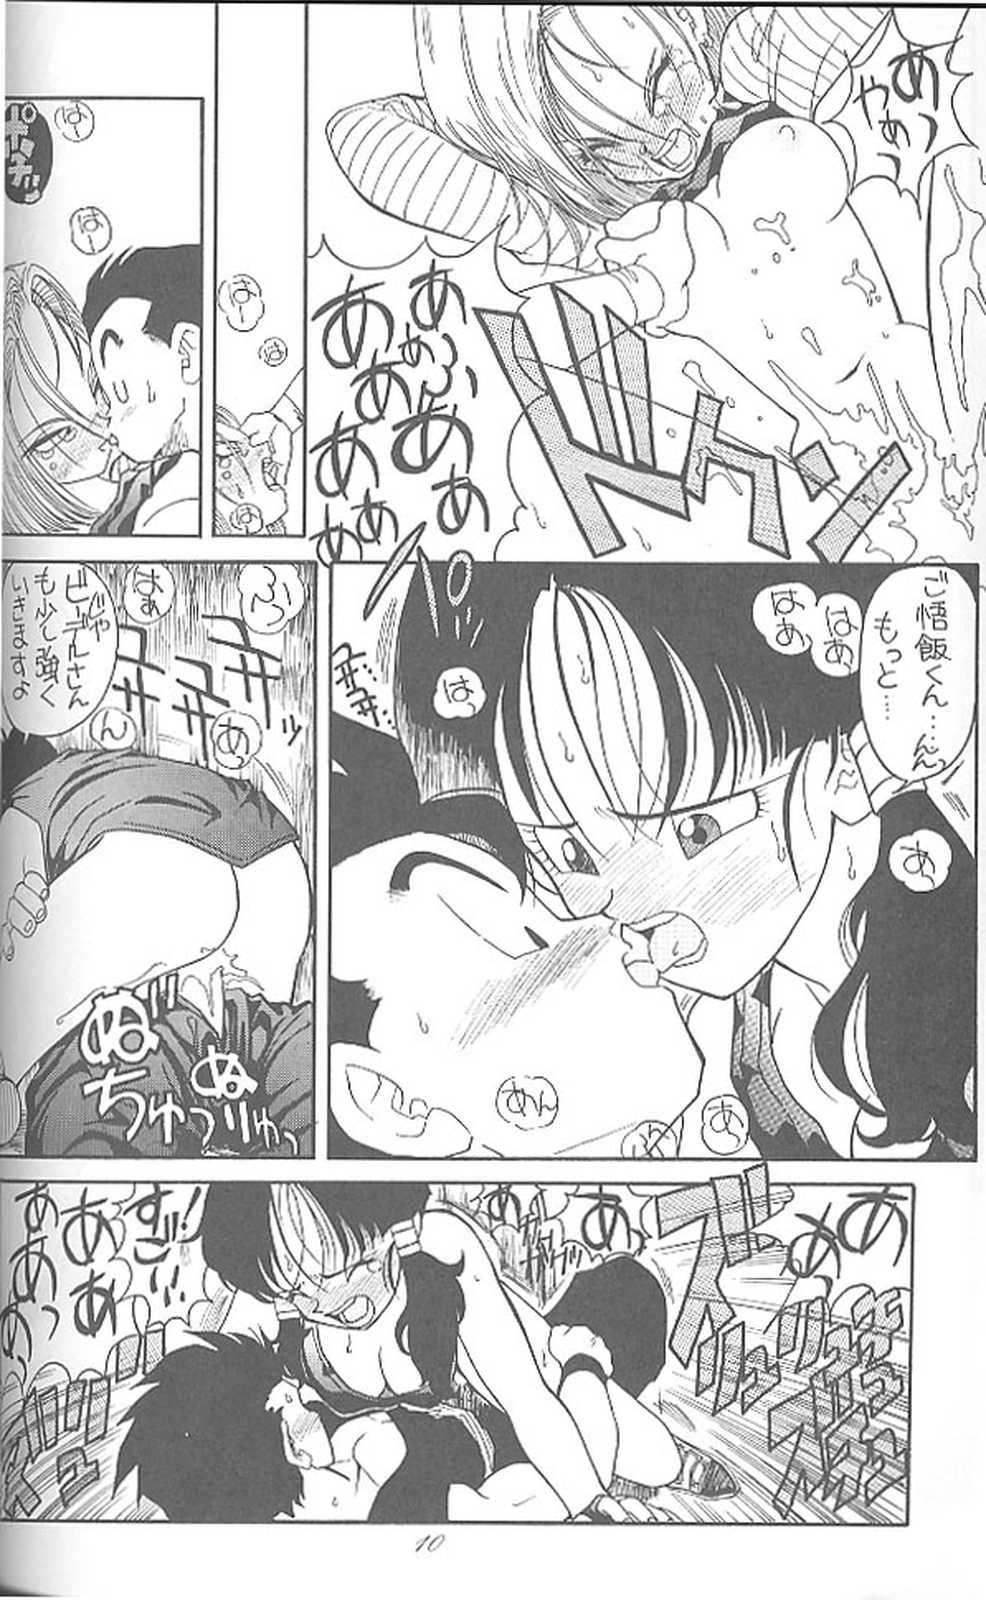 Tight Haraharatokei vol.4 - Dragon ball z Slayers Dirty pair Ghost sweeper mikami World masterpiece theater Dr. slump Tico of the seven seas Hunks - Page 9